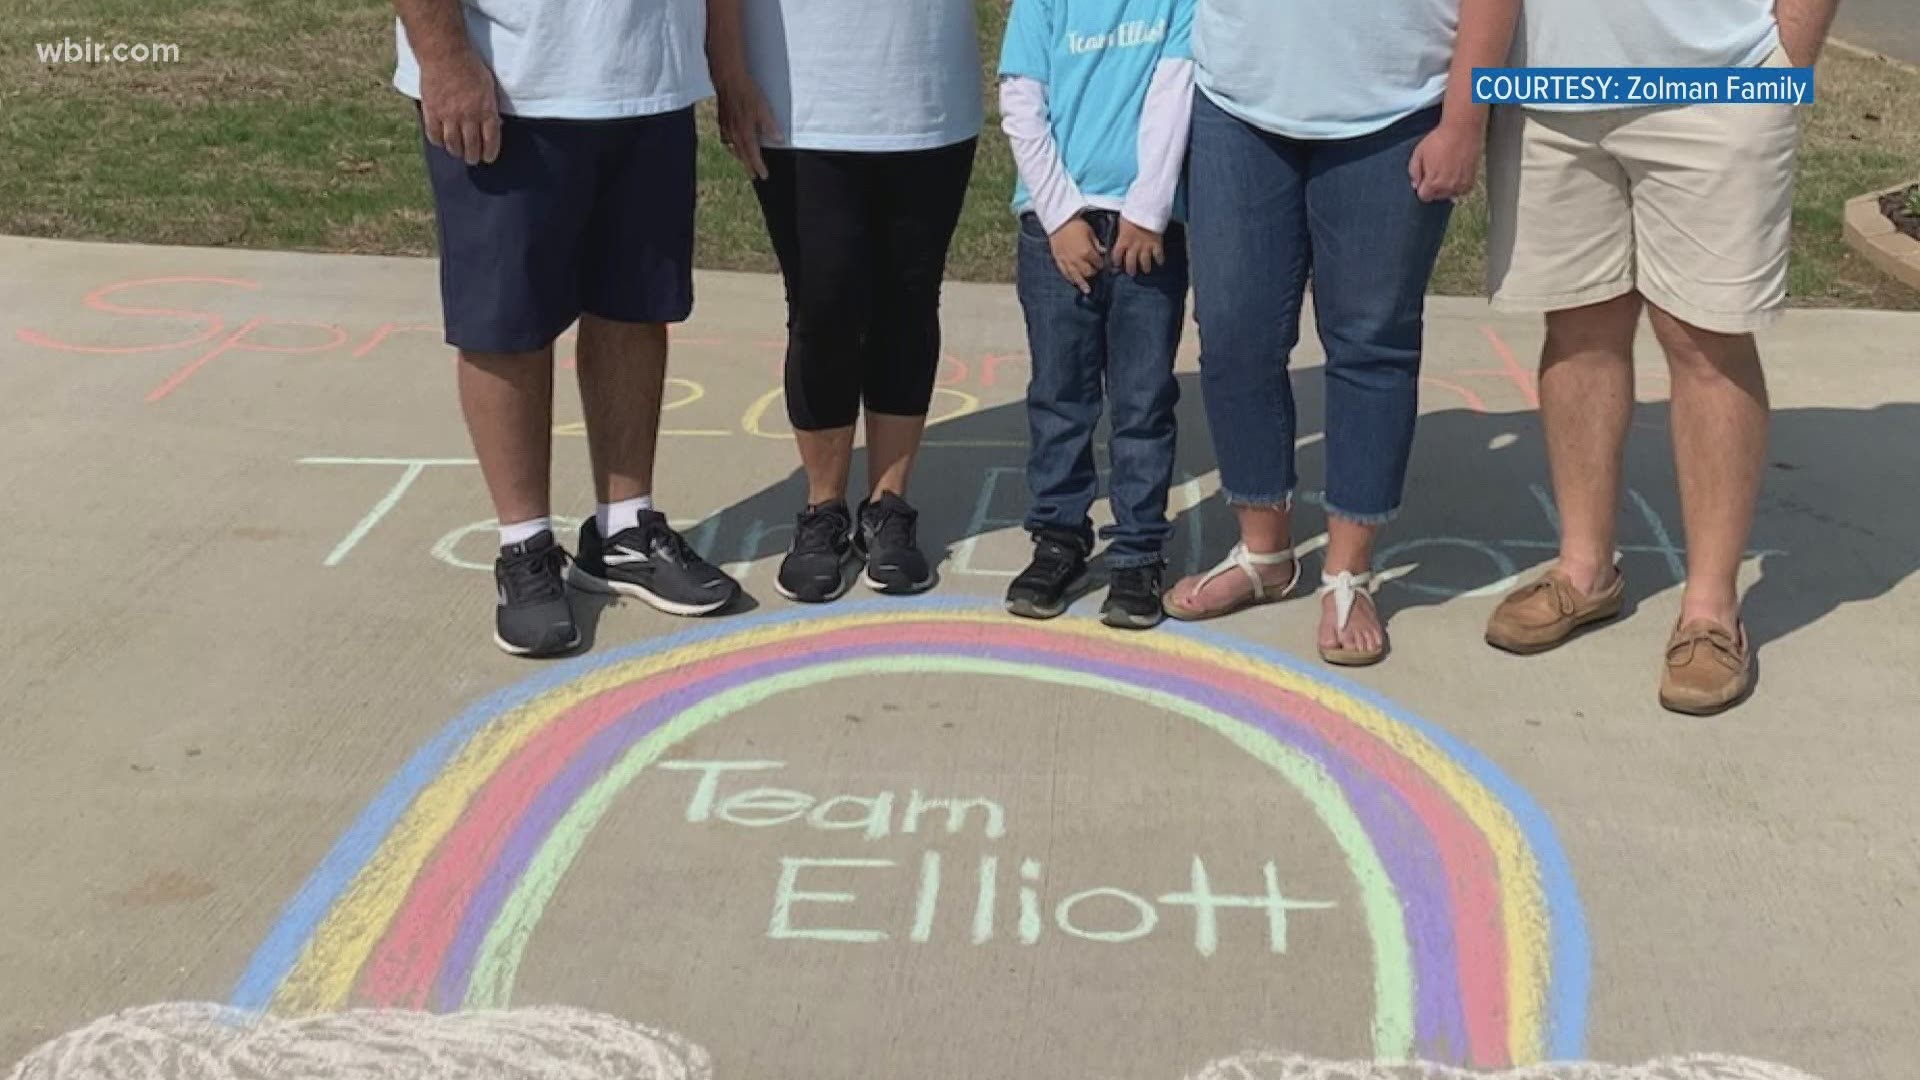 Sprint for the Prints virtual walk starts Oct. 18 and you can walk or run 3.1 miles in one week. Cost is $35 for "Precious Prints Project". Oct. 16, 2020-4pm.